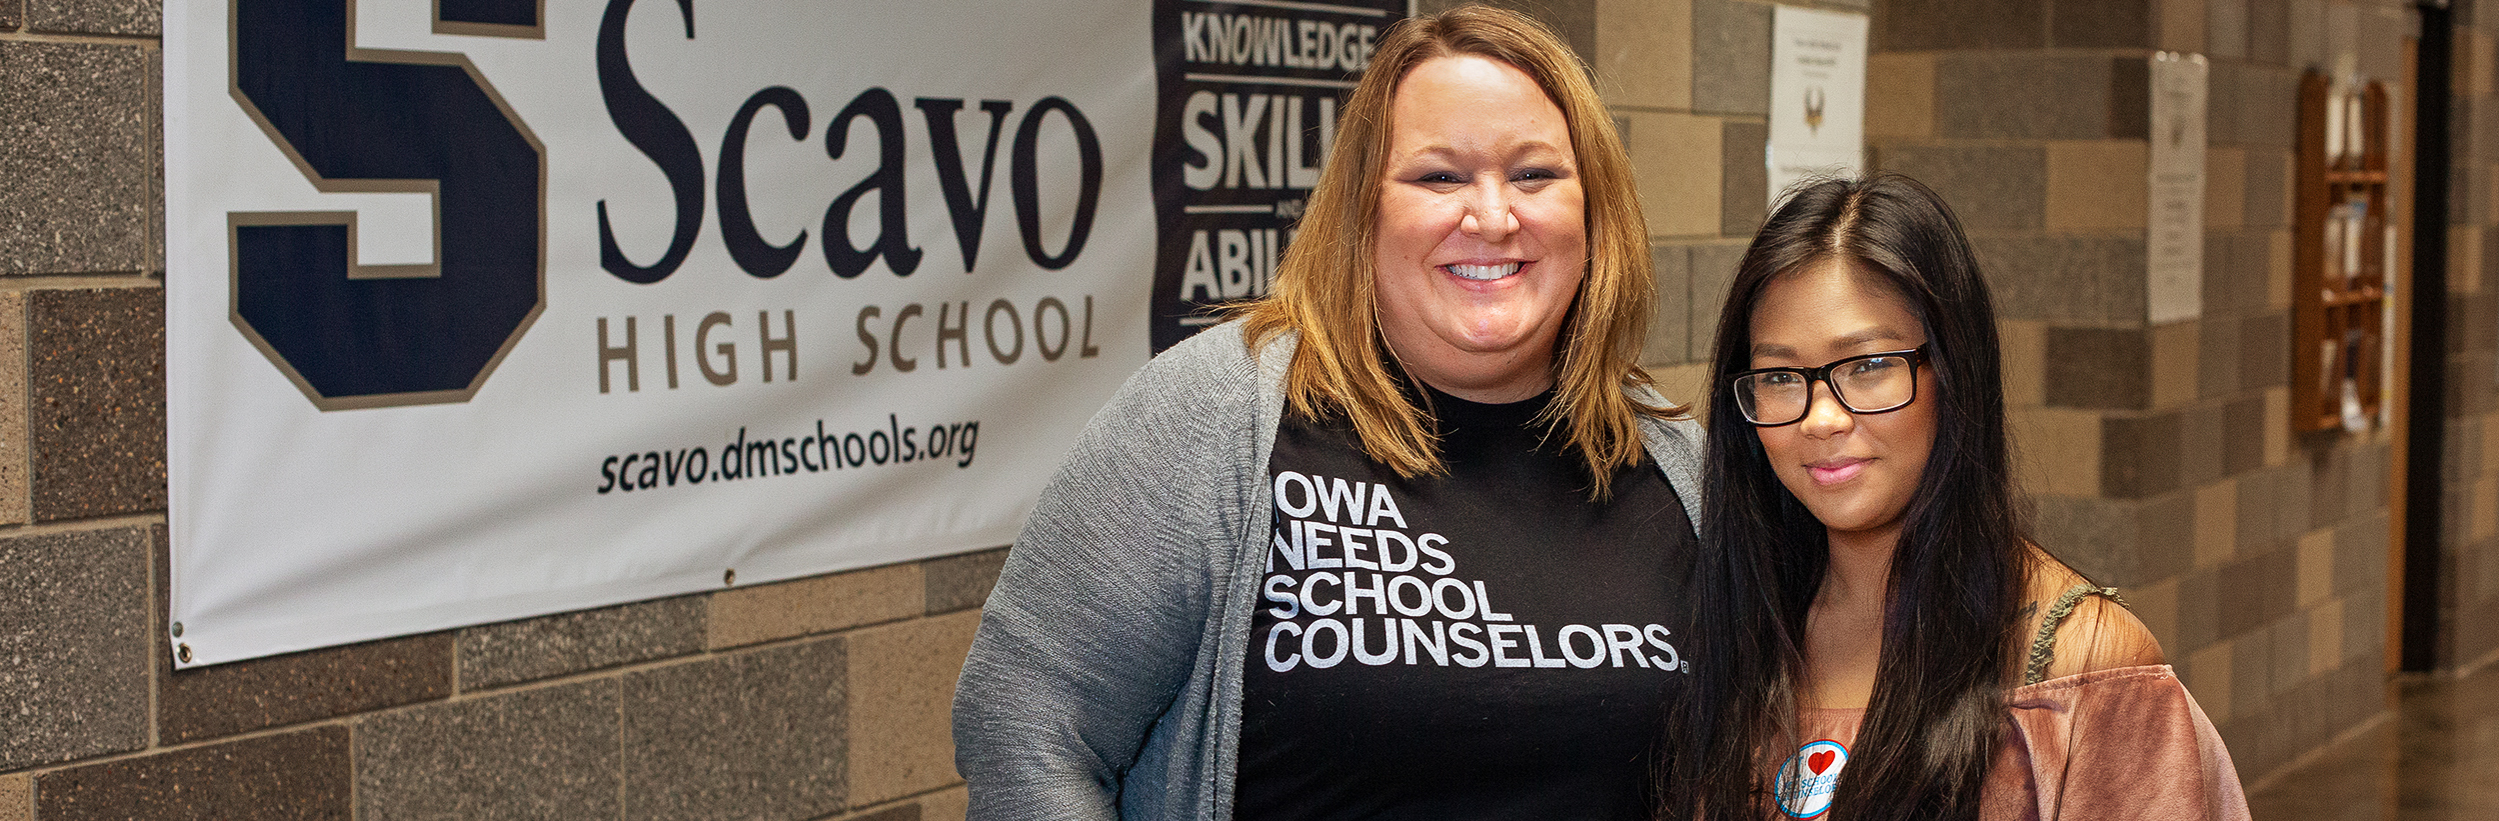 Scavo High Counselor and Student Team Up for Success